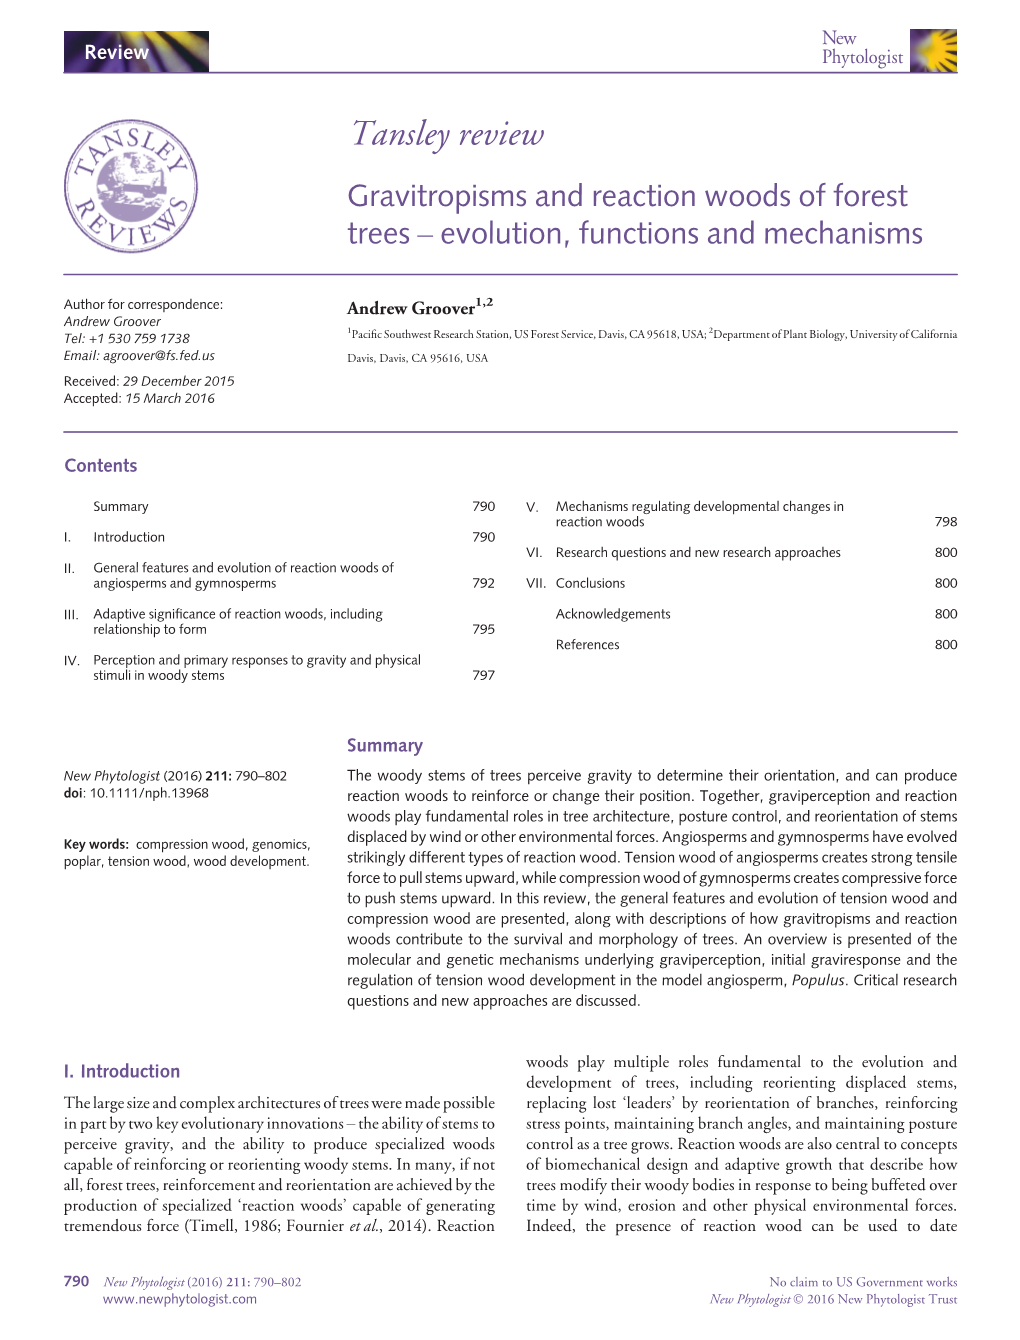 Gravitropisms and Reaction Woods of Forest Trees – Evolution, Functions and Mechanisms